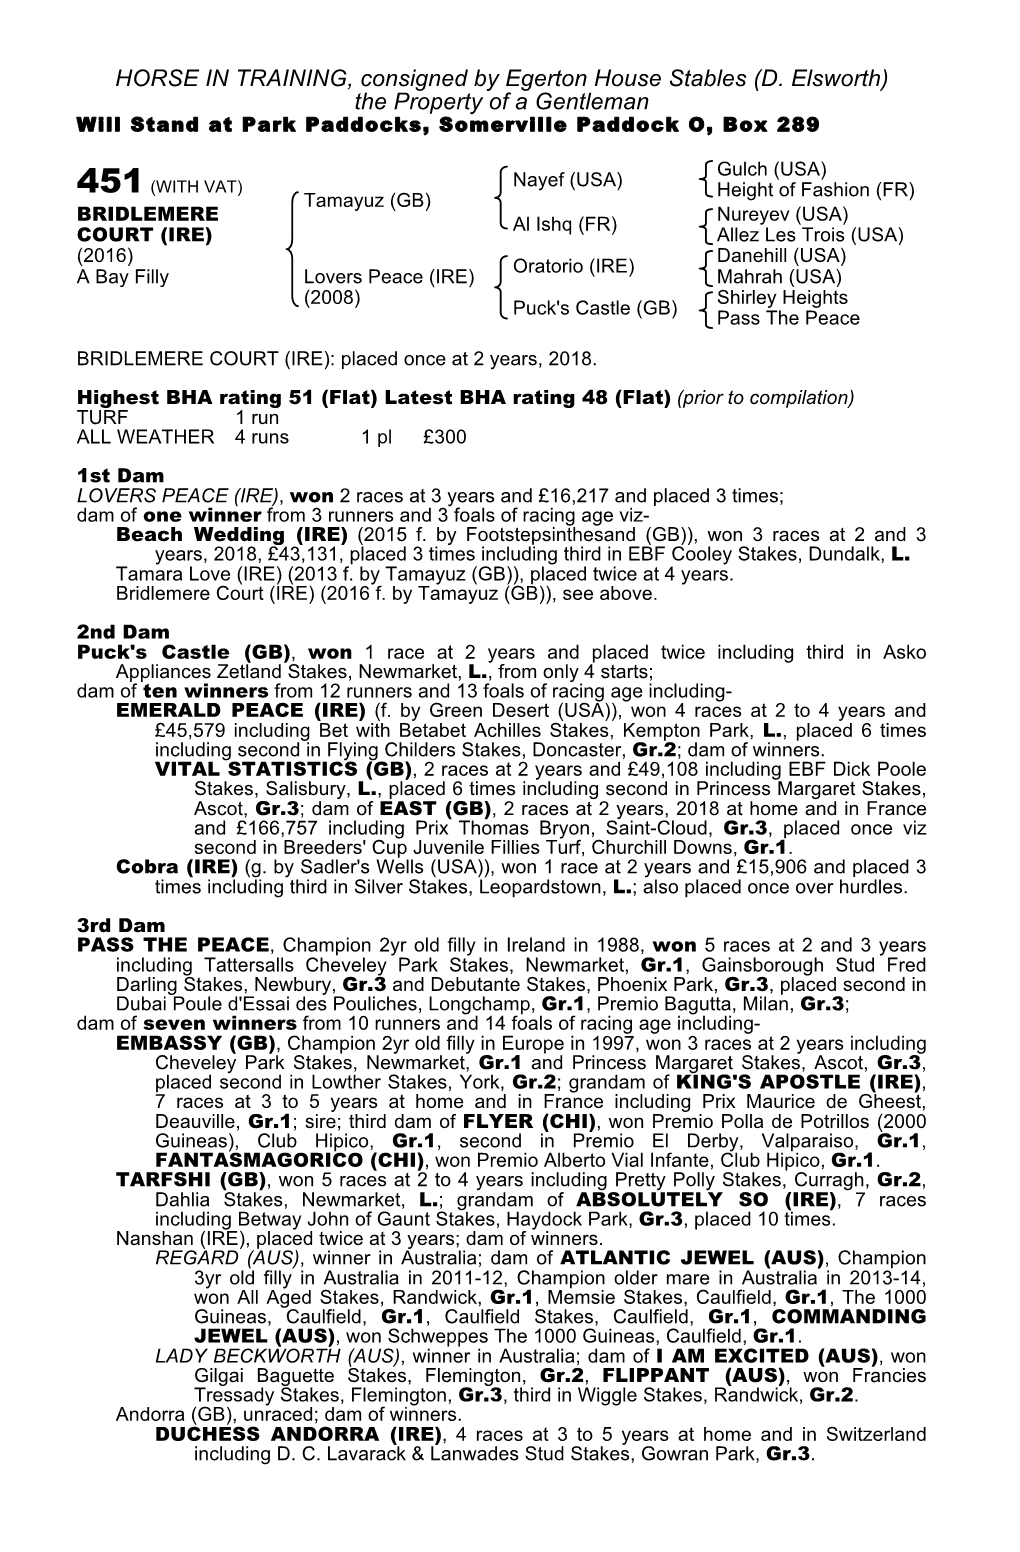 HORSE in TRAINING, Consigned by Egerton House Stables (D. Elsworth) the Property of a Gentleman Will Stand at Park Paddocks, Somerville Paddock O, Box 289